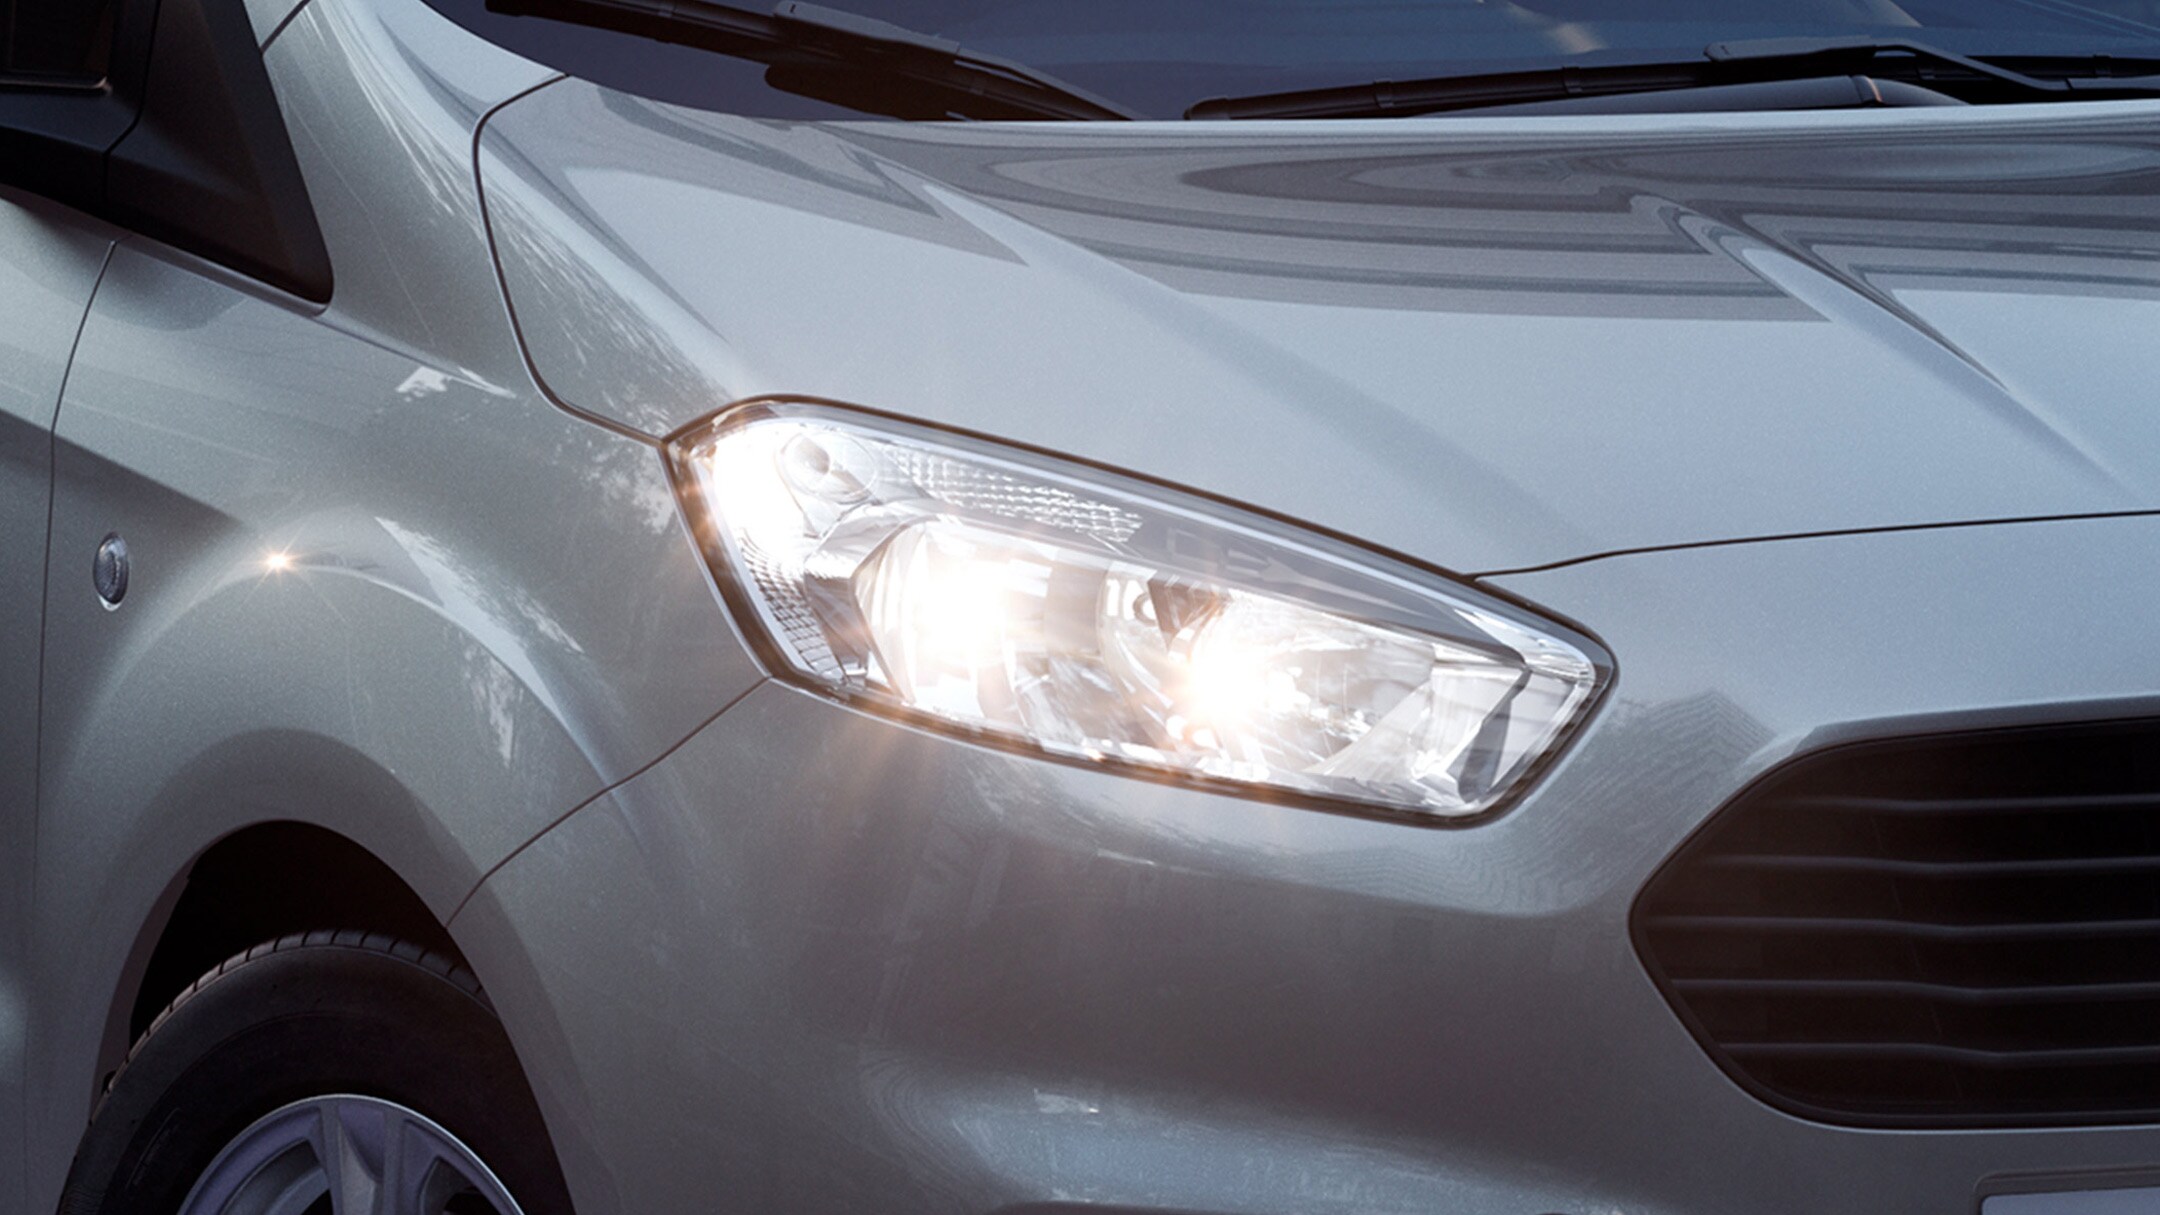 Ford Transit Courier Auto-headlights in detail